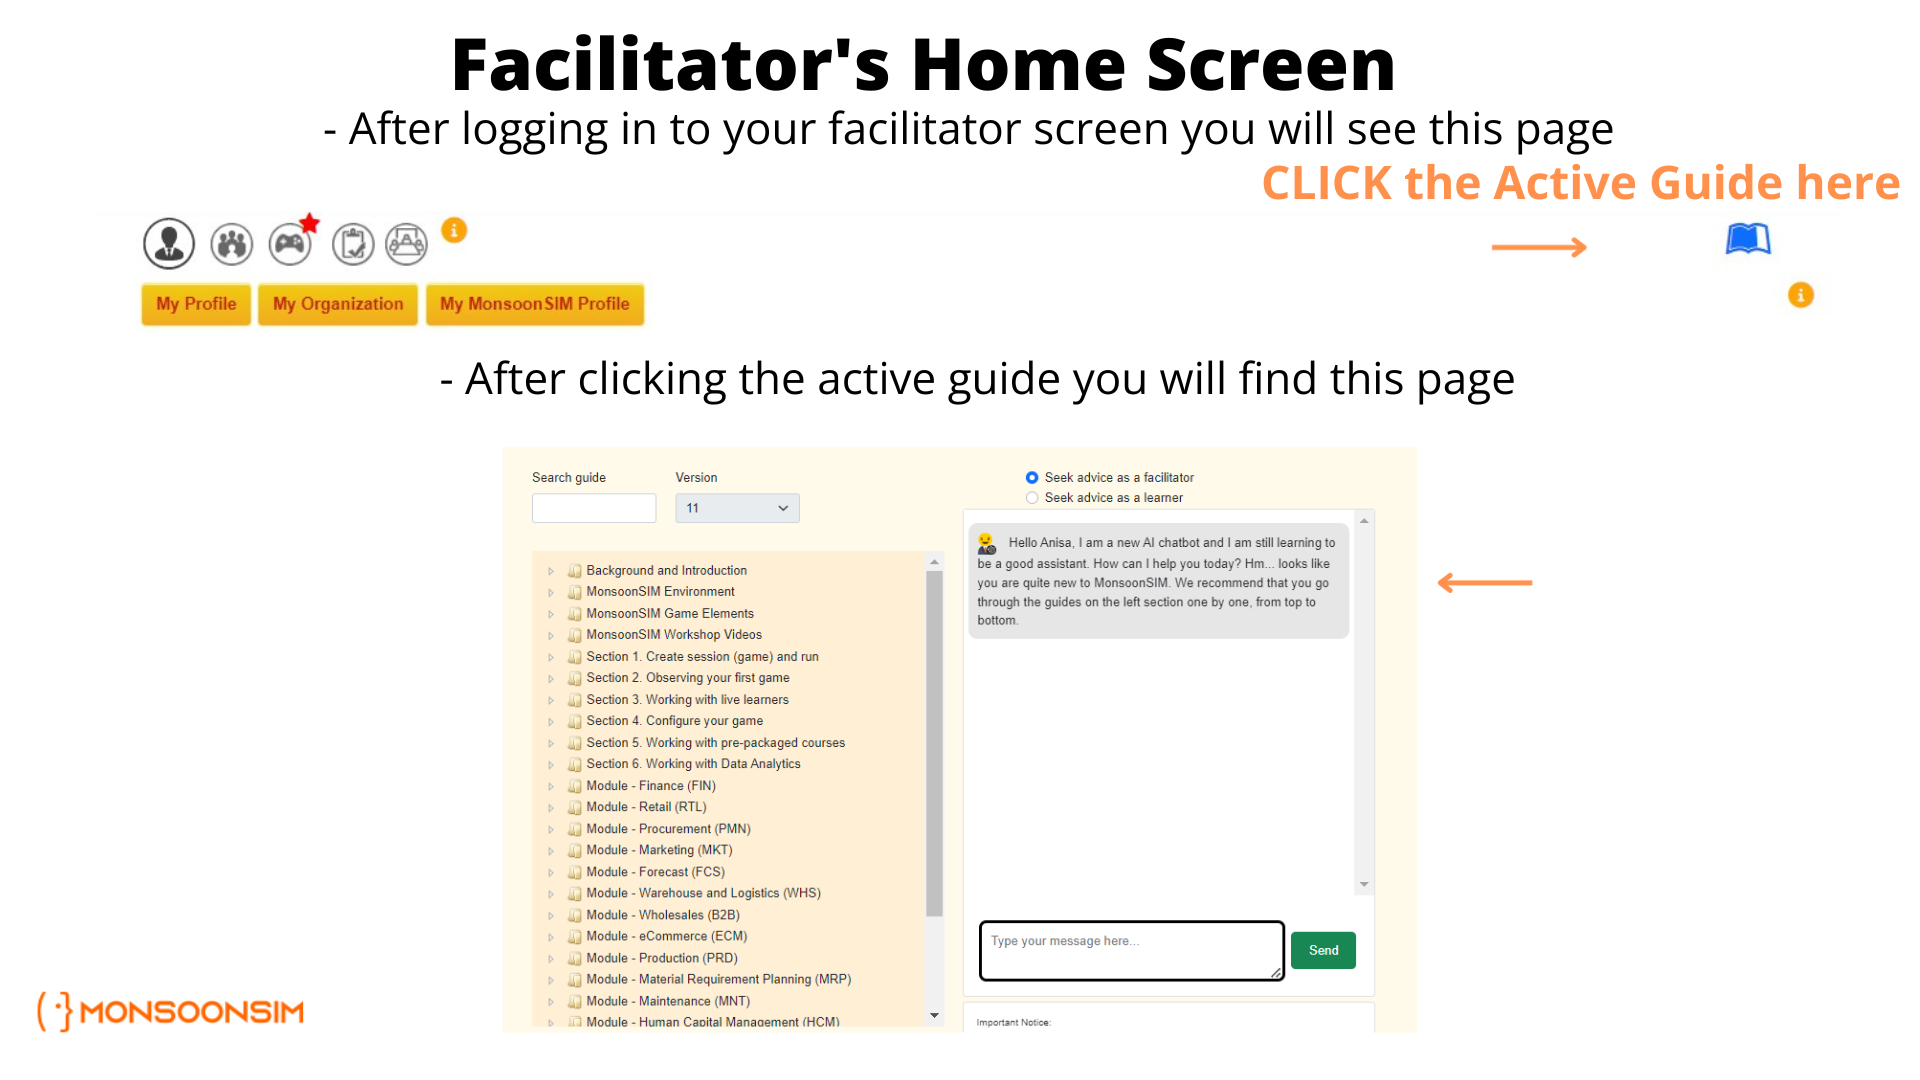 Screenshot of the MonsoonSIM facilitator's home screen after login, highlighting the 'CLICK the Active Guide here' prompt, which points to the Active Guide icon.